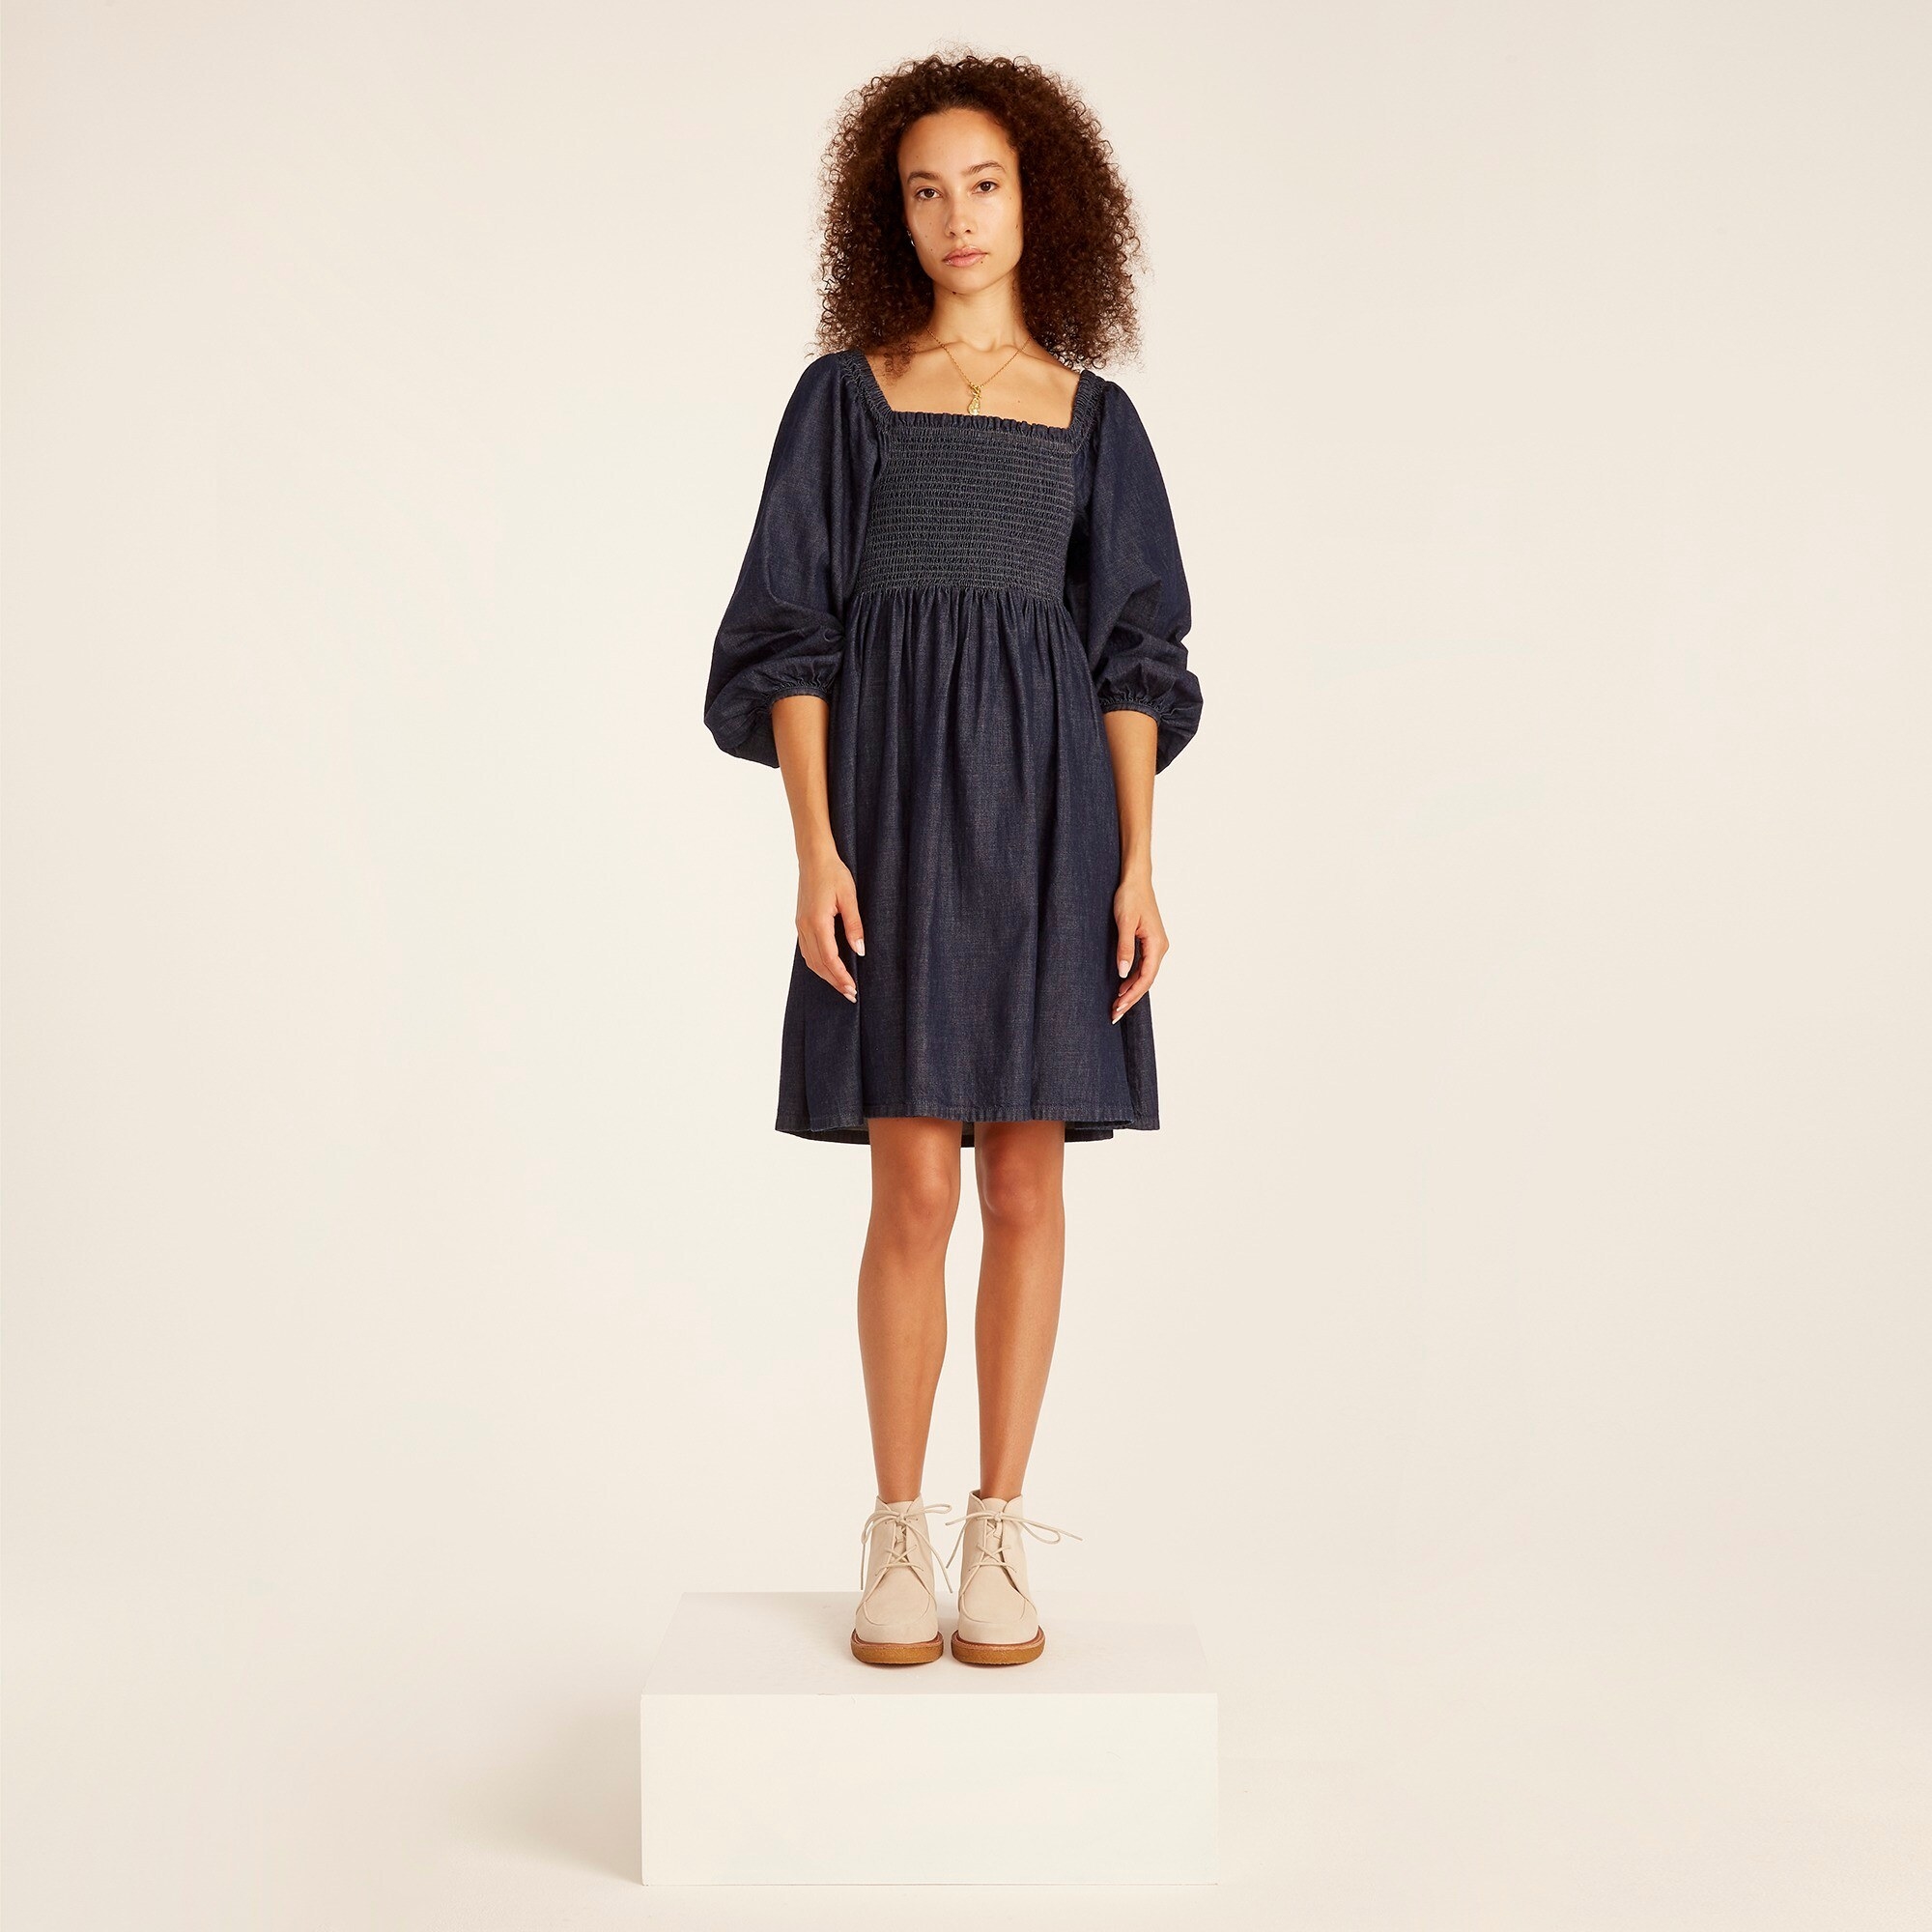 An image of a model wearing a puff-sleeve dress made from cotton materials